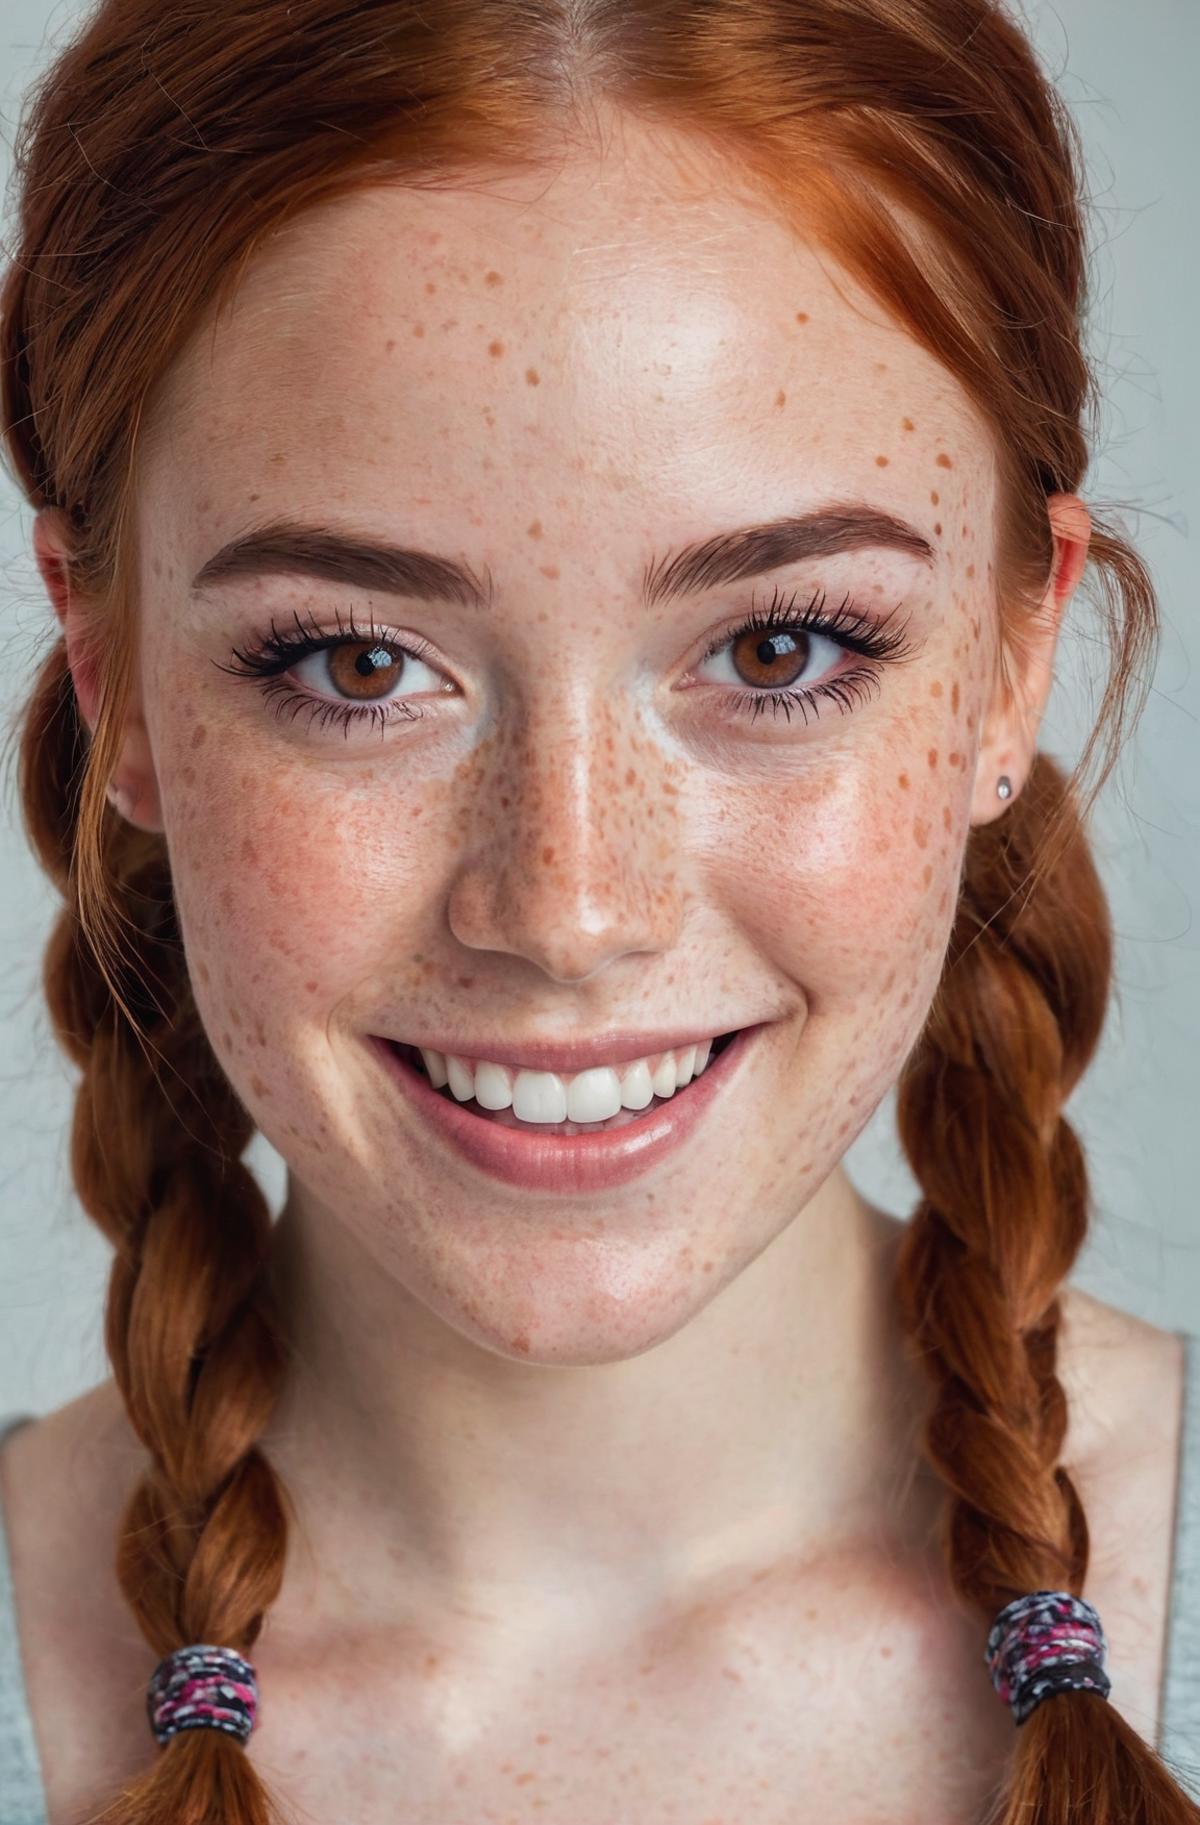 A smiling woman with red hair and freckles, wearing a ponytail.